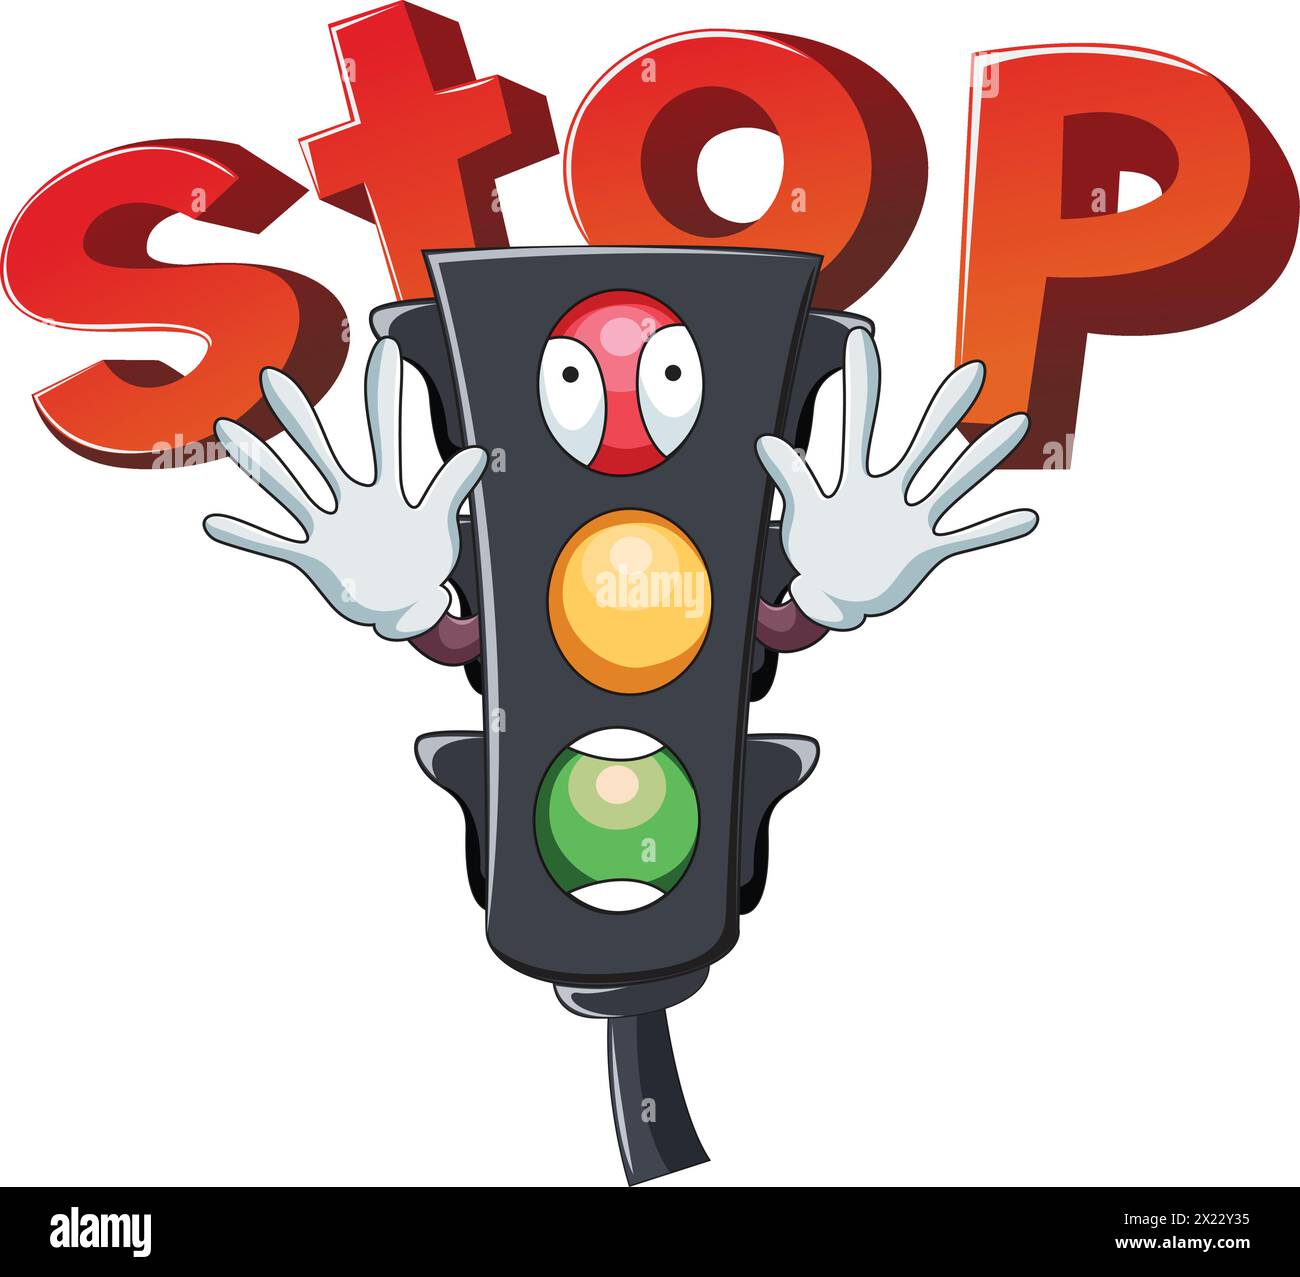 Vector illustration showing traffic lights in cartoon style indicating stop Stock Vector